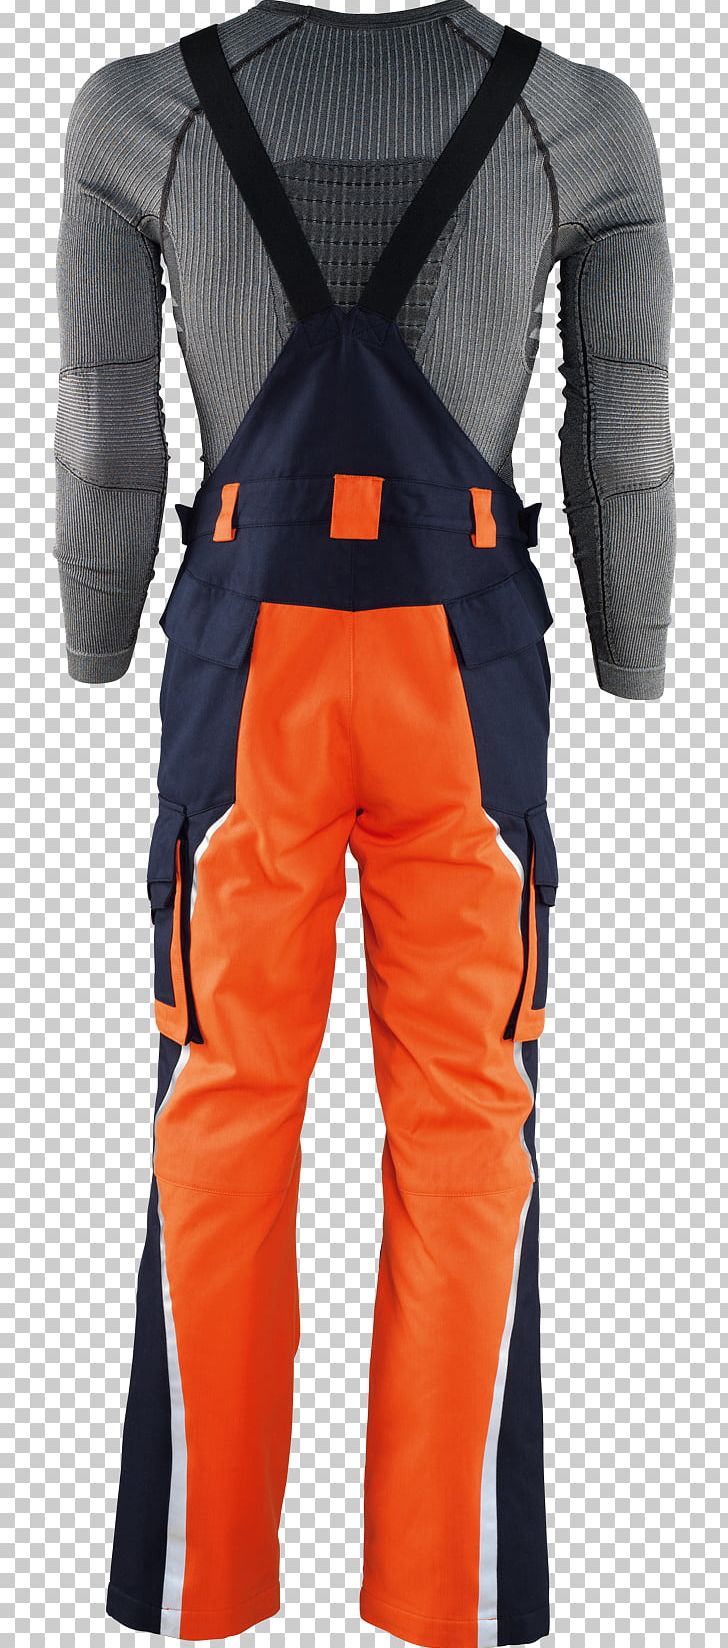 Dungarees Hockey Protective Pants & Ski Shorts Costume PNG, Clipart, Costume, Dungarees, Flash Material, Hockey, Hockey Protective Pants Ski Shorts Free PNG Download